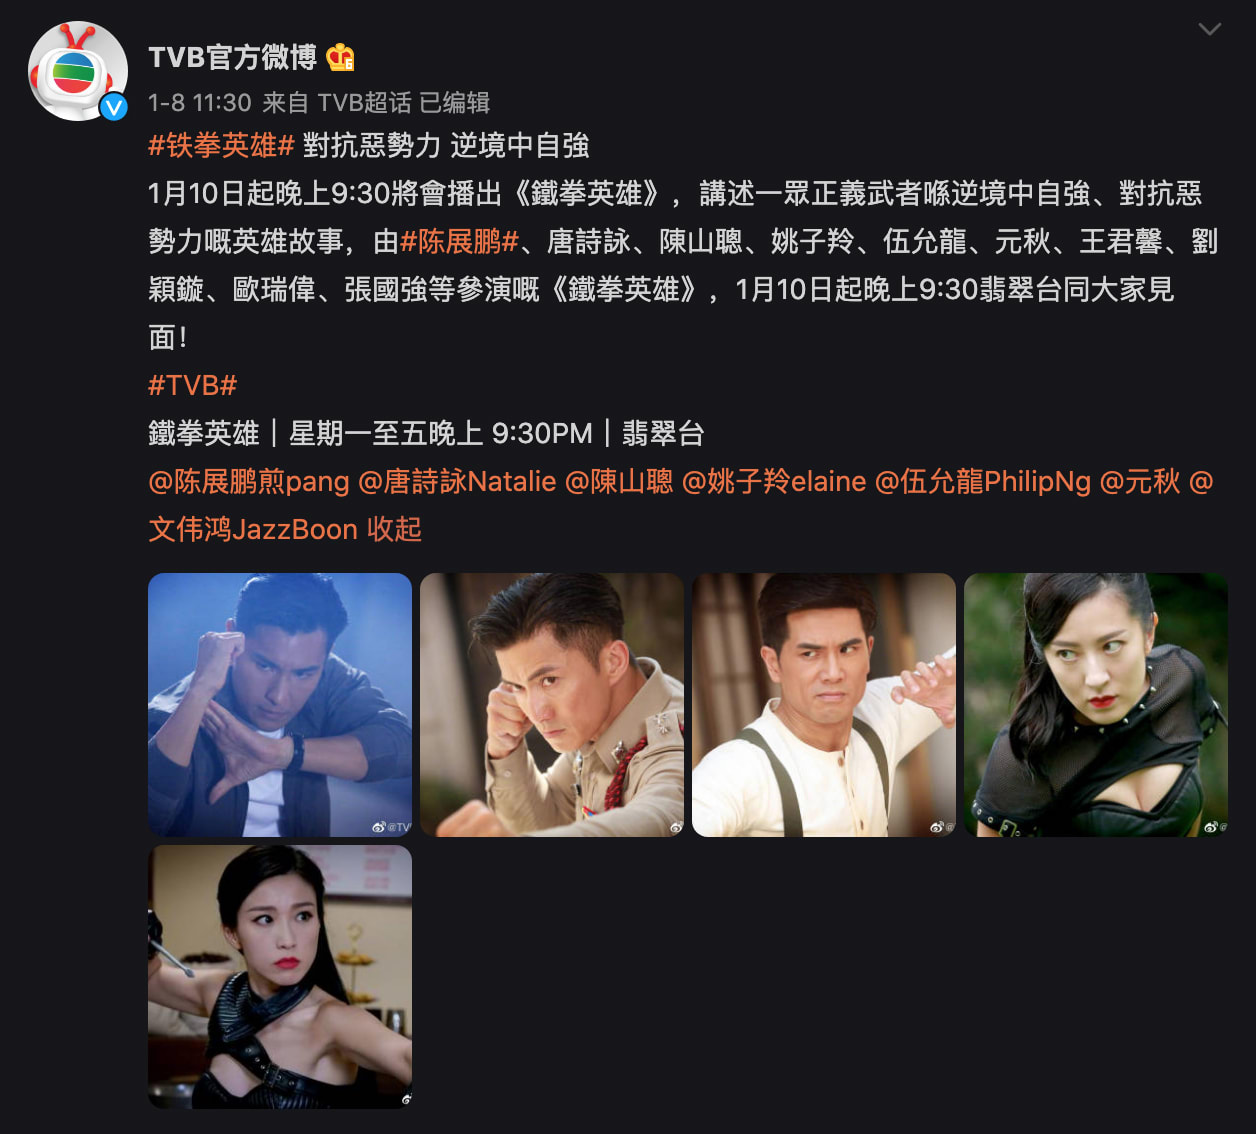 This was TVB's first post... where Grace, who is one of the leads, was MIA